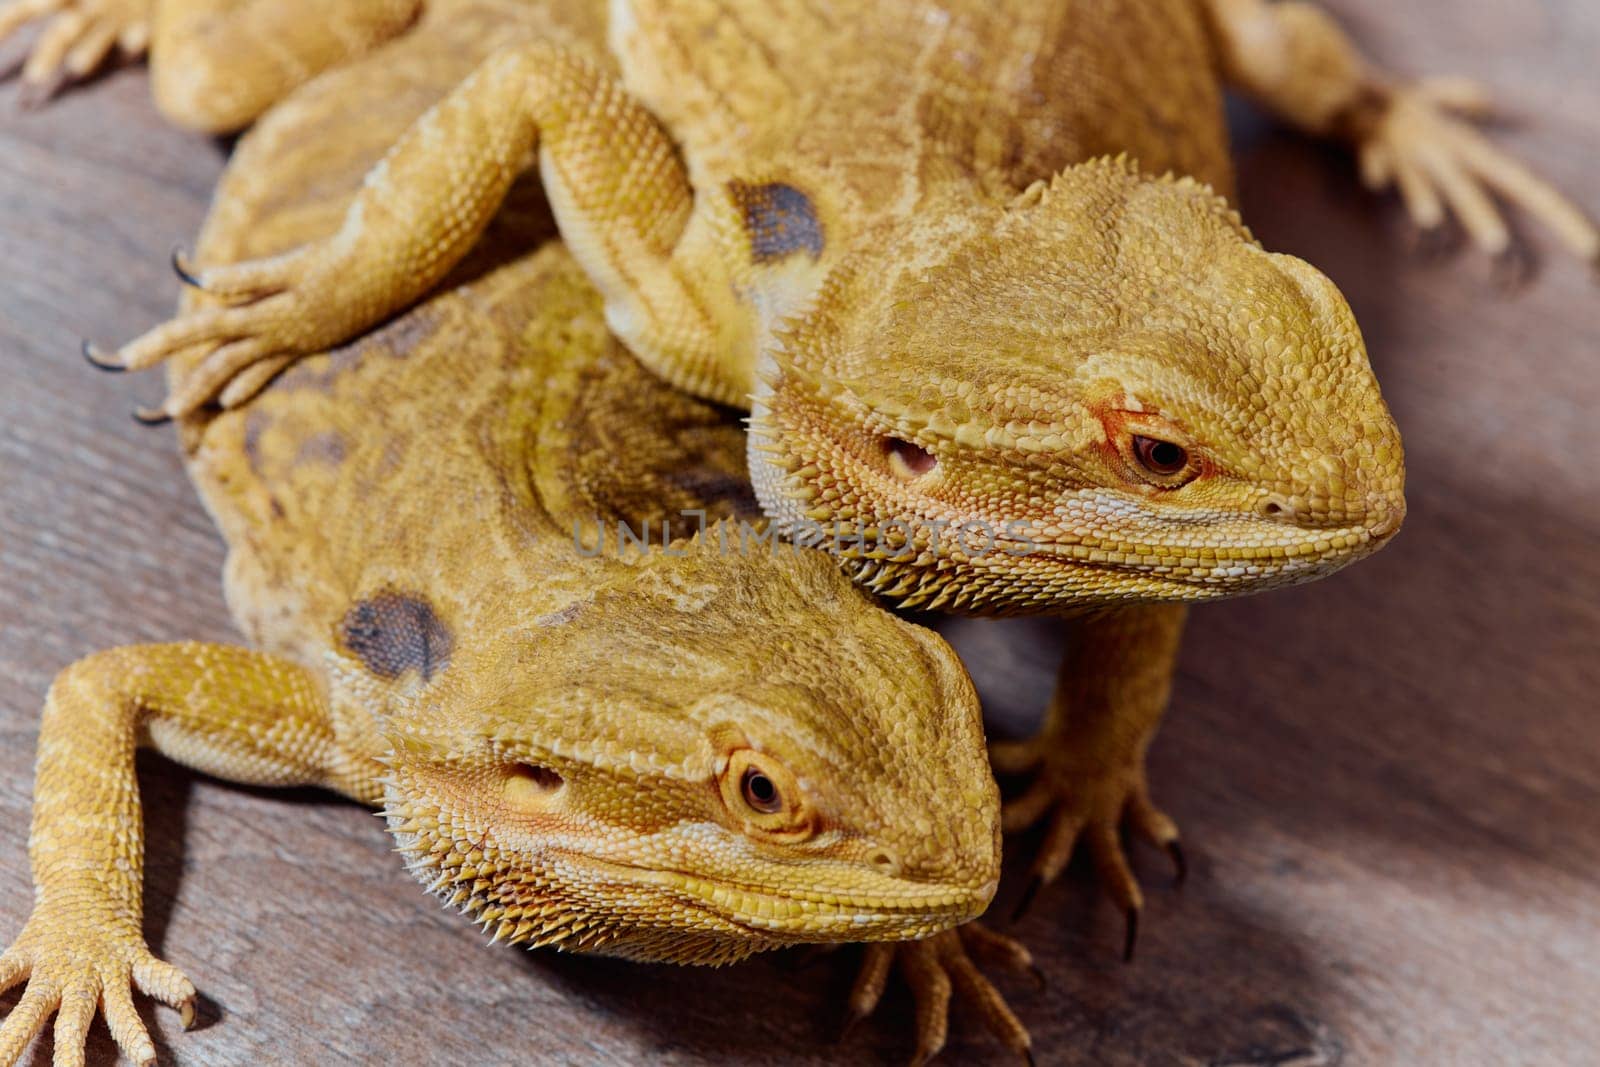 Bearded Dragons: A Close-Up Look at This Amazing Lizards by dotshock